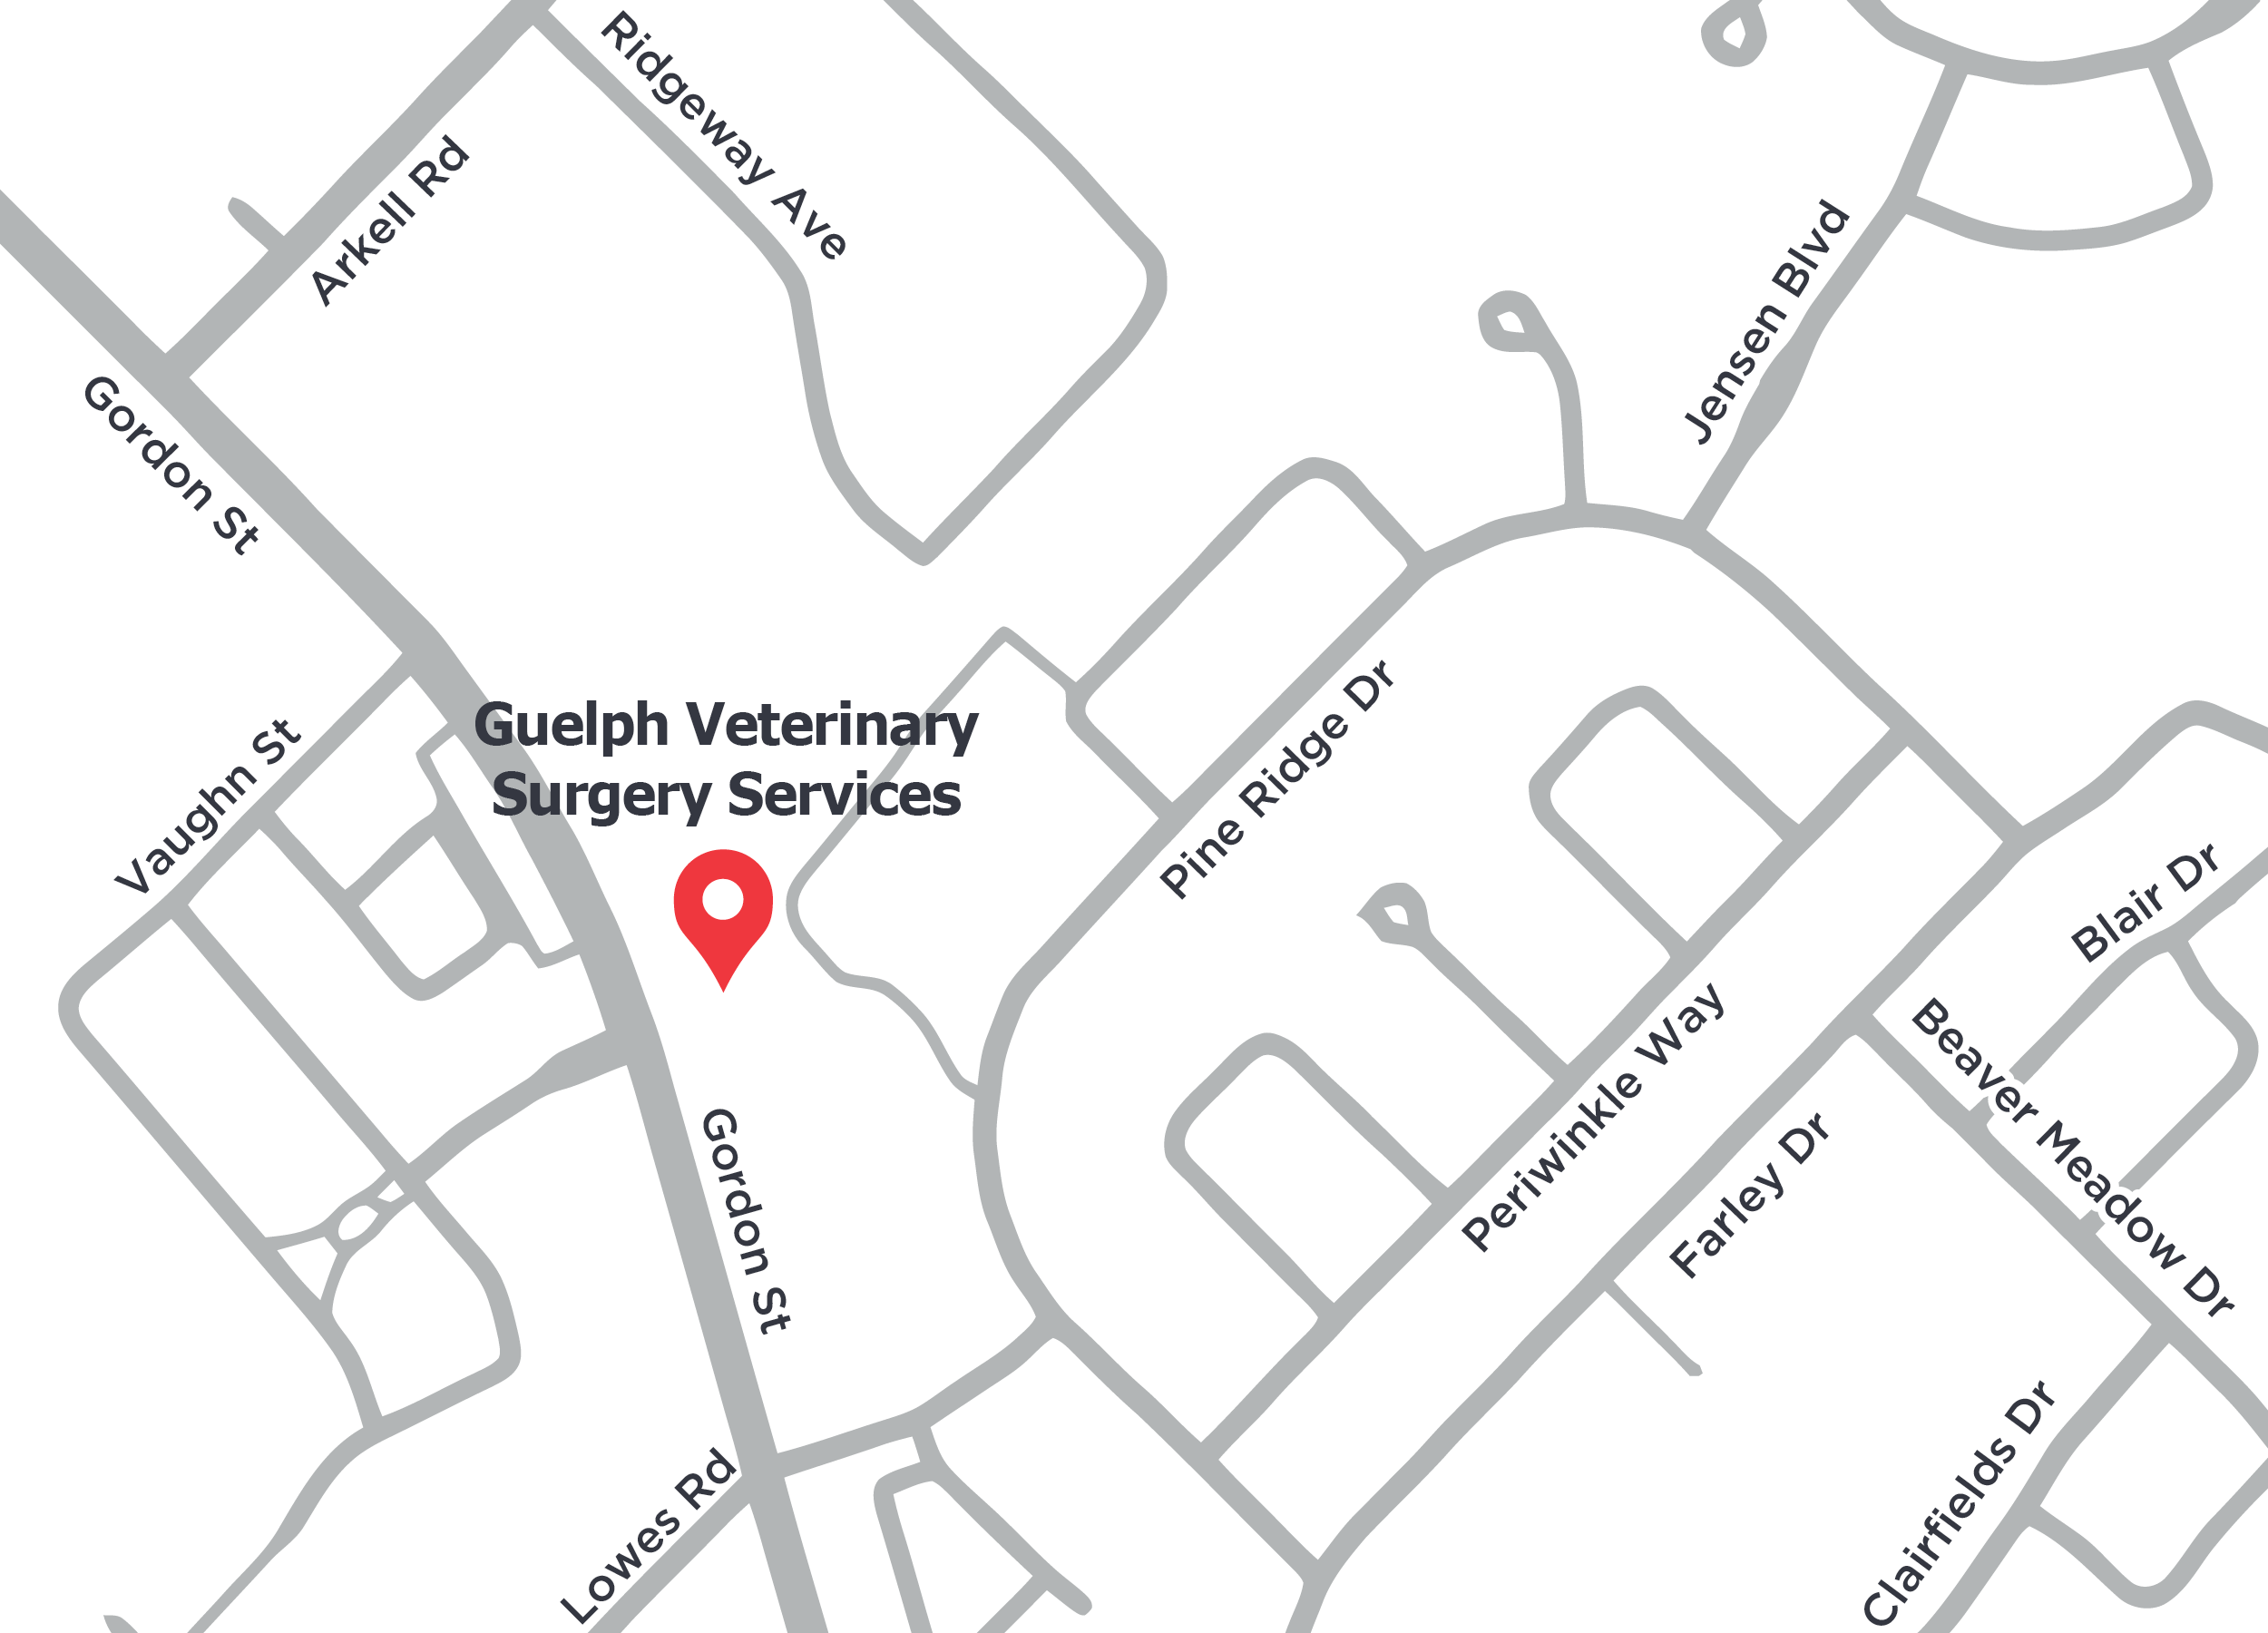 Guelph Veterinary Surgery Services